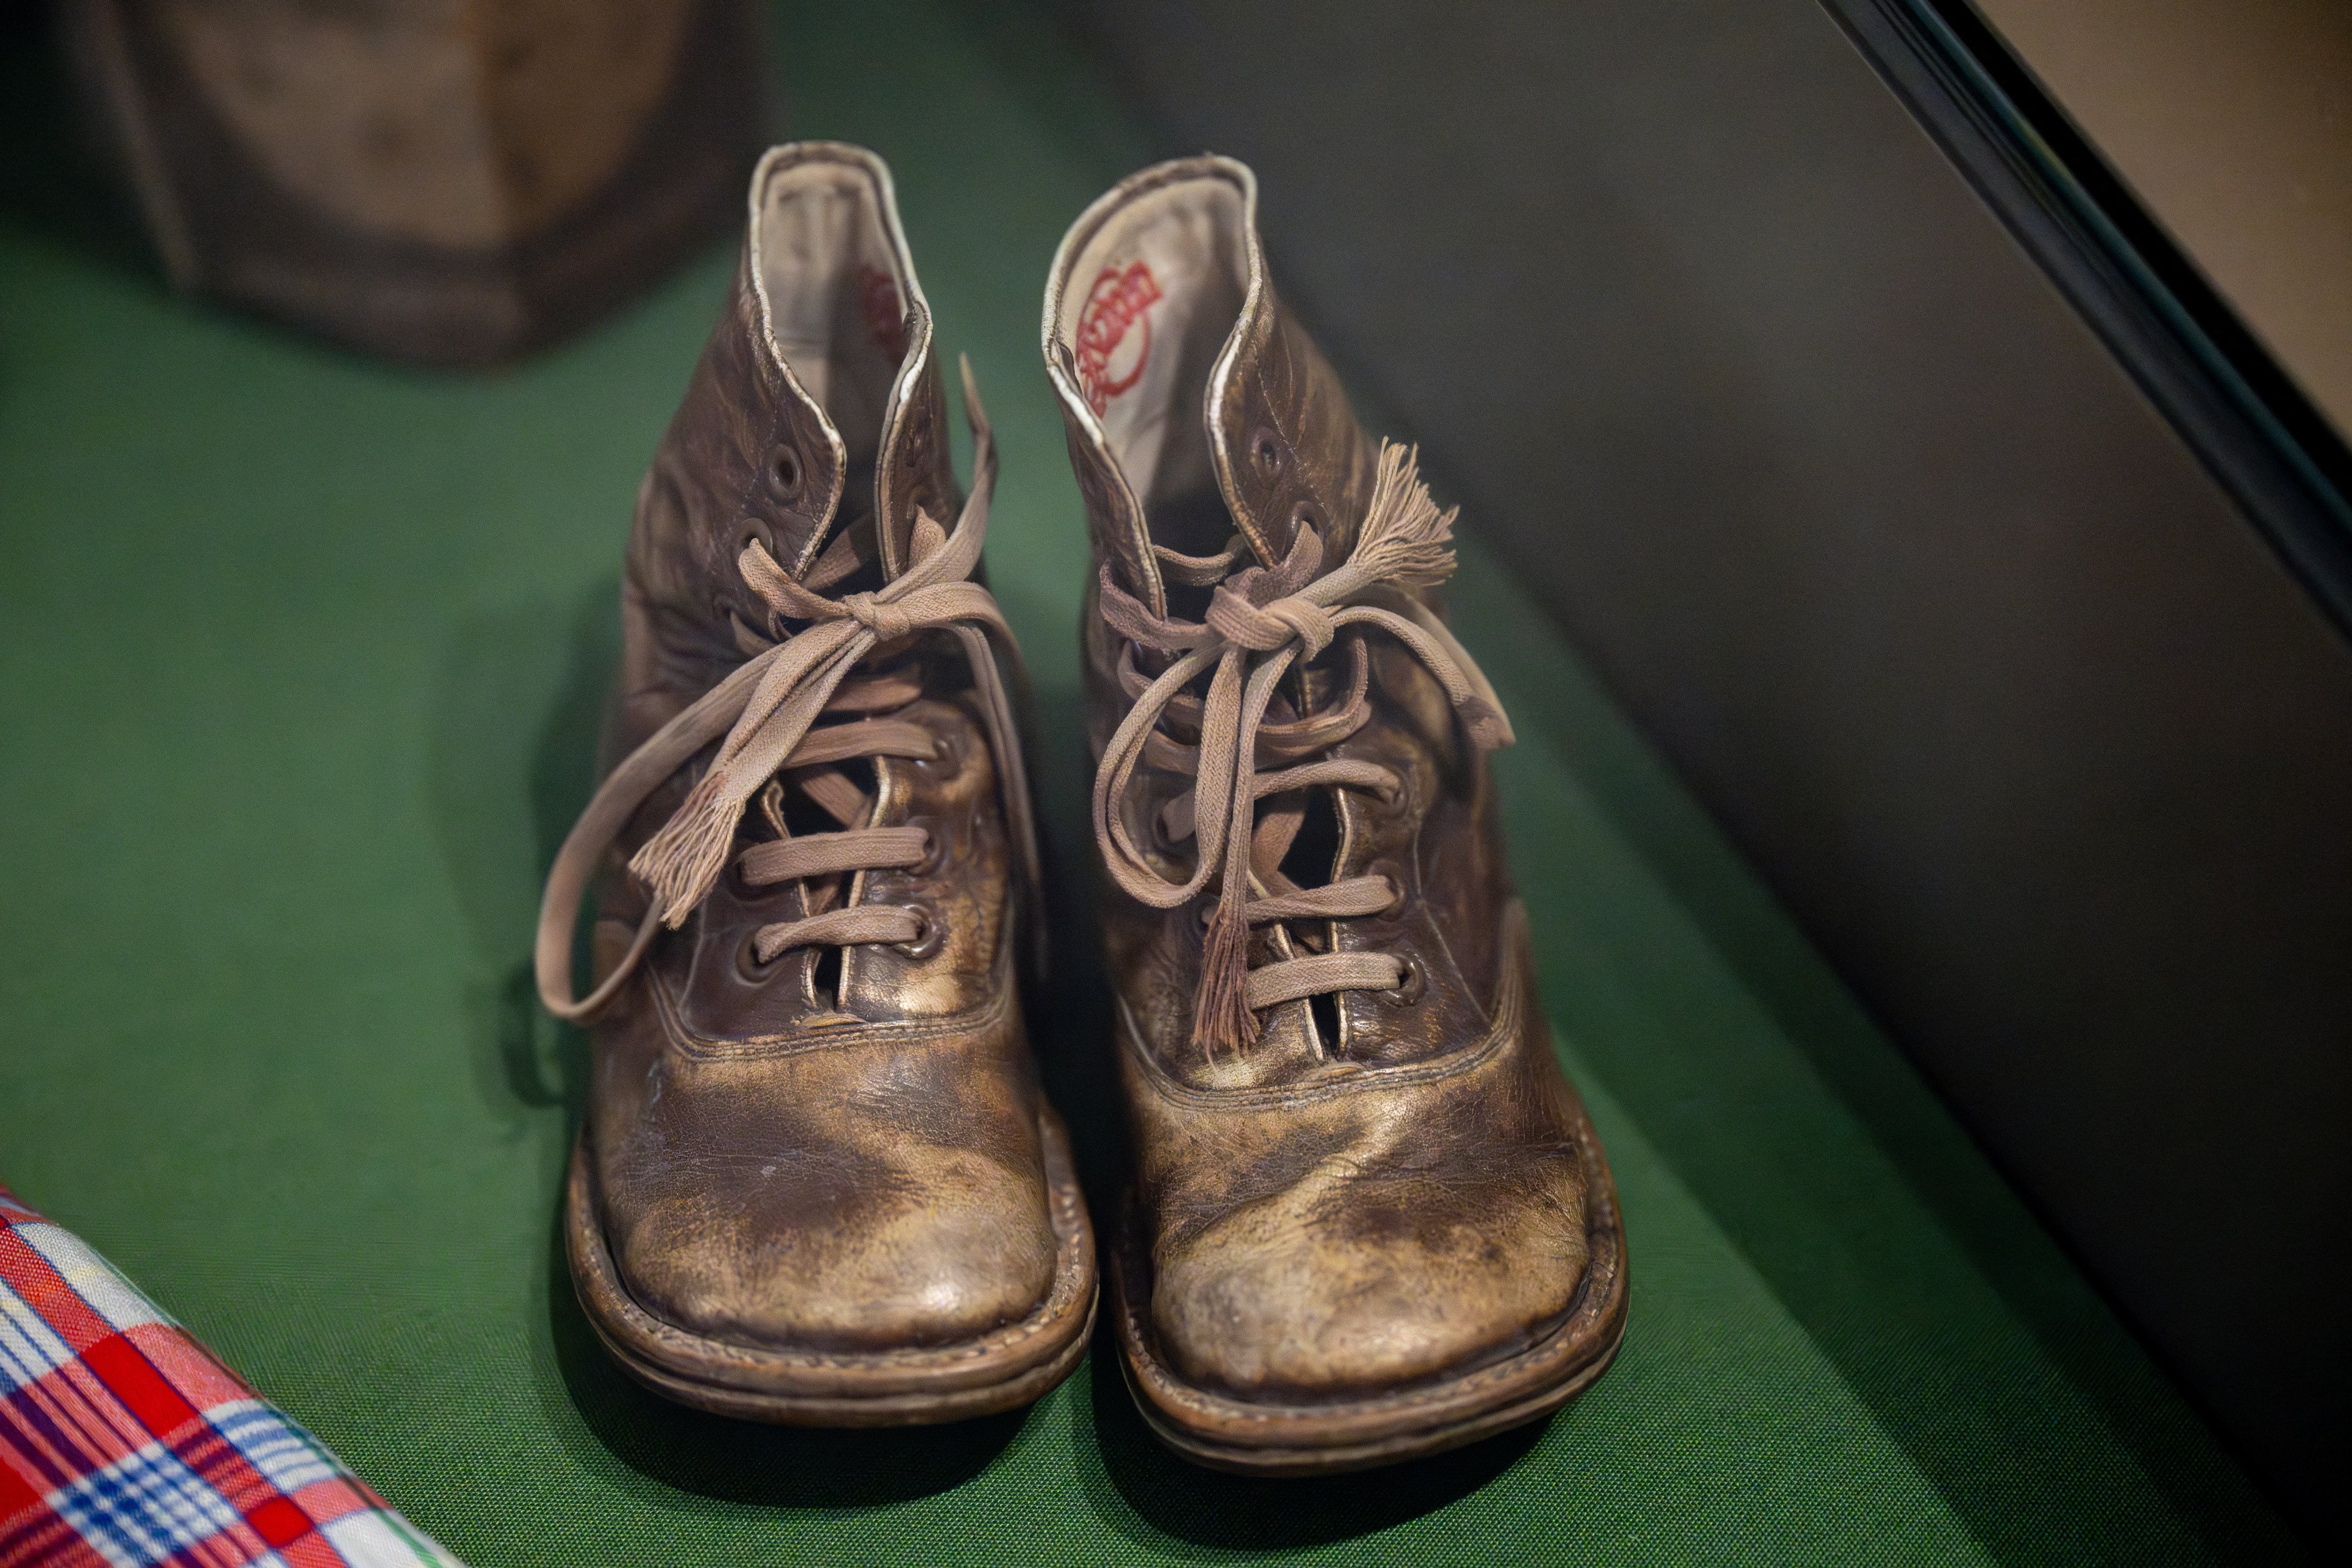 The pair of shoes Holocaust survivor Roosje Steenhart-Drukker was wearing as a two-year-old when her Jewish parents left her, hoping she would be found, on display at the Holocaust Museum in Amsterdam as part of an exhibition about Nazi Germany’s occupation of the Netherlands. Photo: AFP